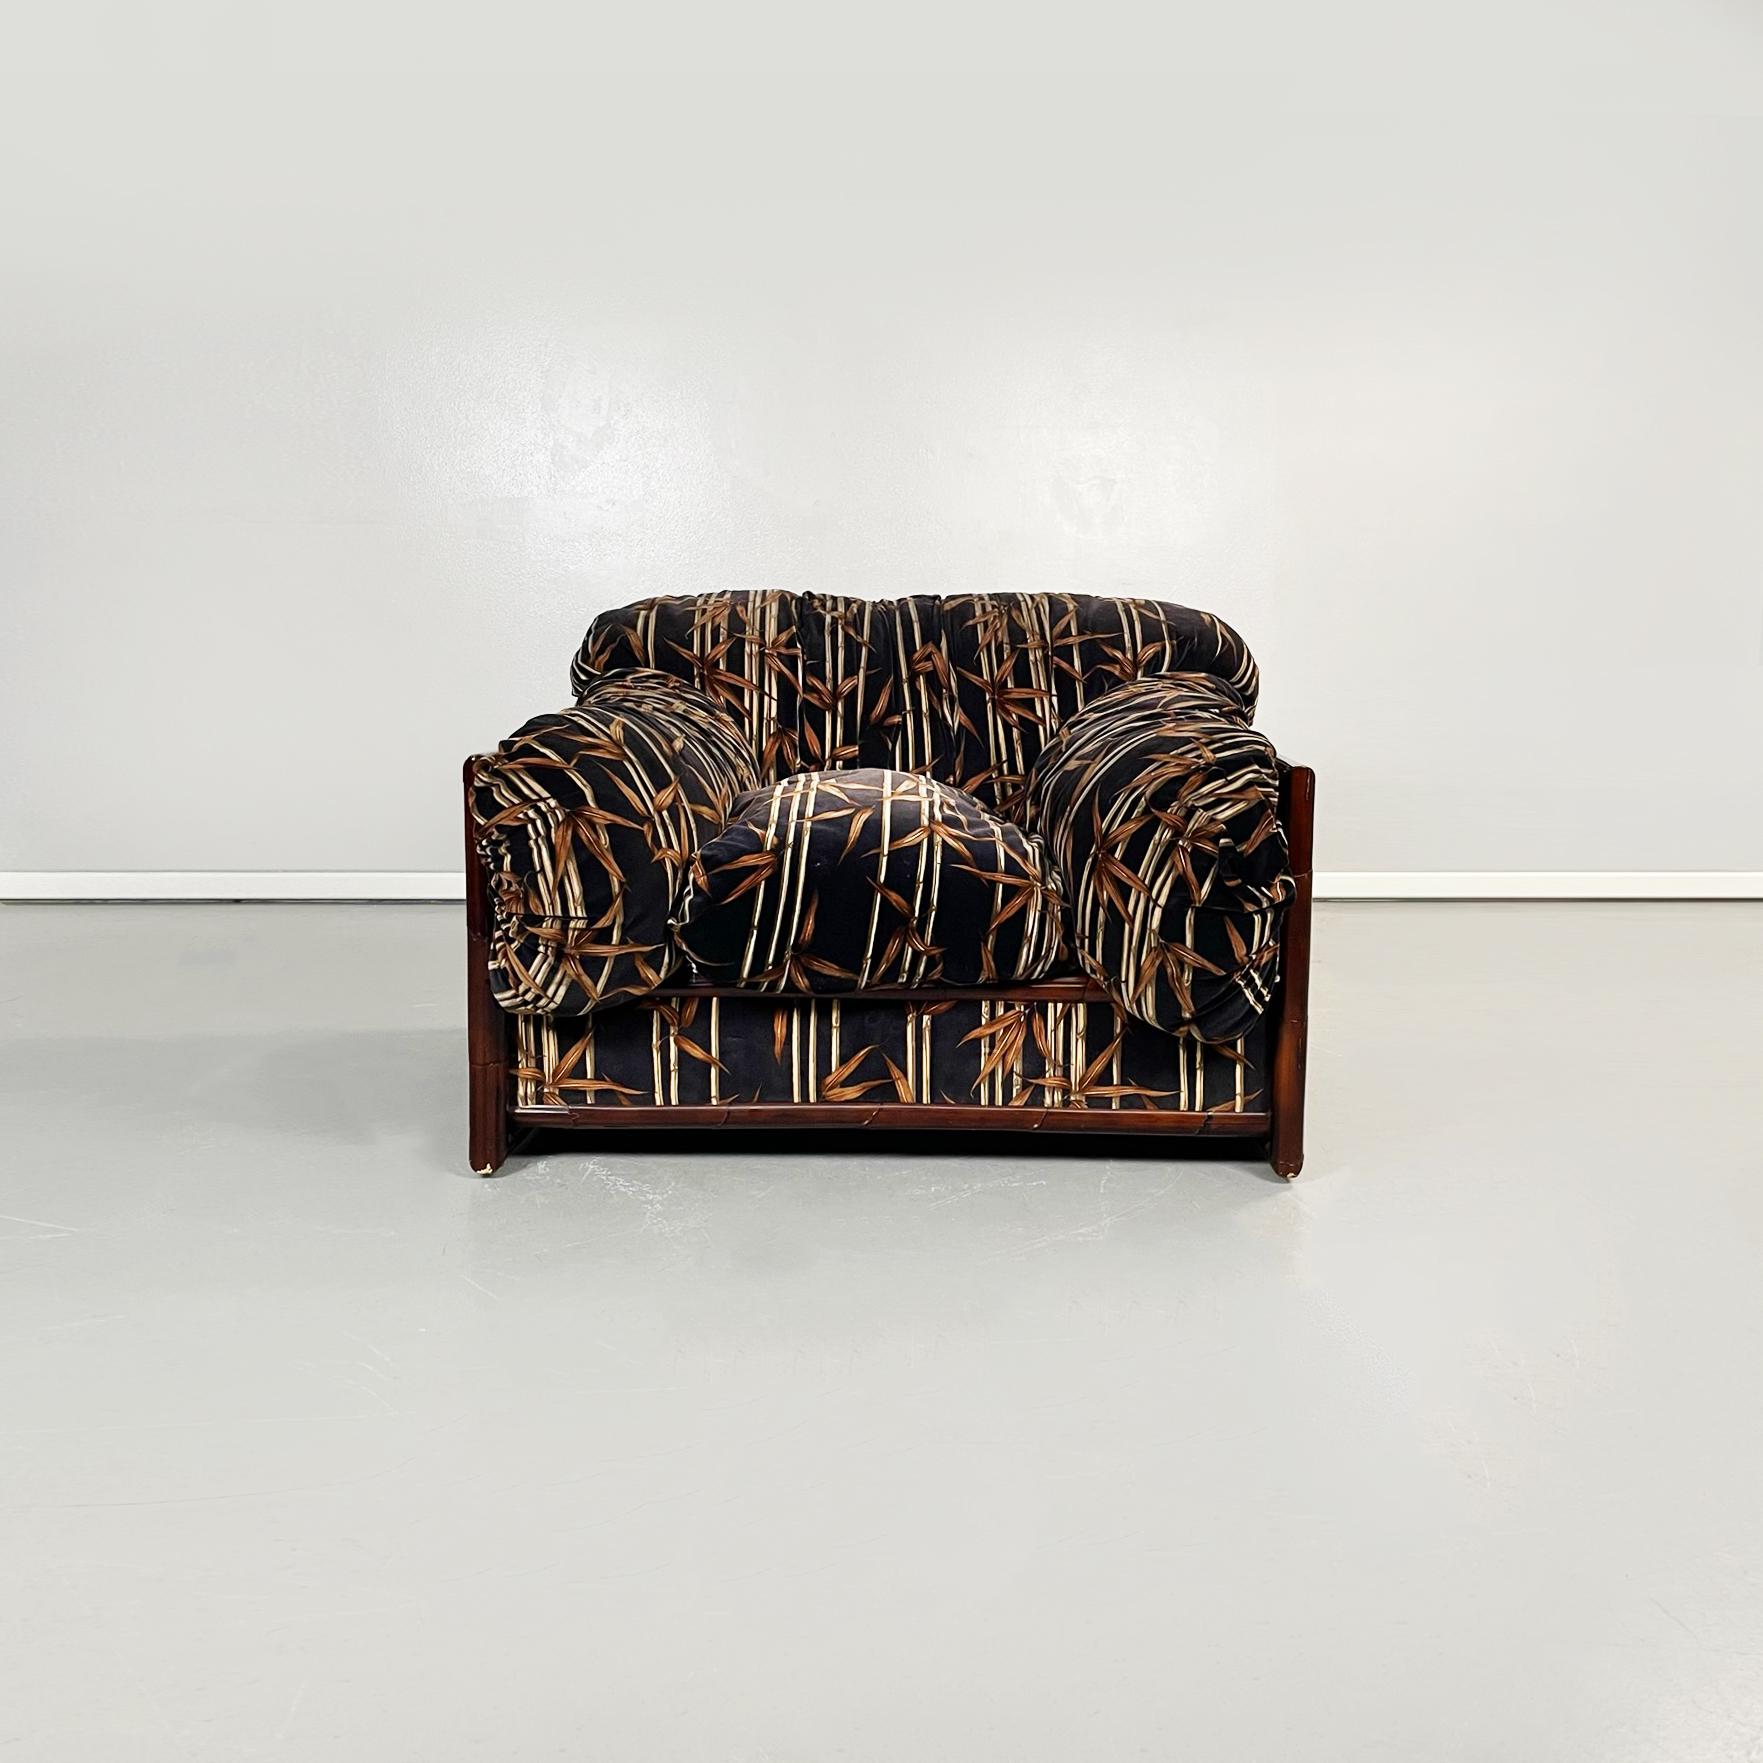 Italian mid-century modern Armchair in bamboo and fabric, 1980s
An armchair in bamboo wood and fabric with brown bamboo pattern on a black background. Exposed bamboo wood structure. The armchair is composed of a rectangular cushion as seat, two